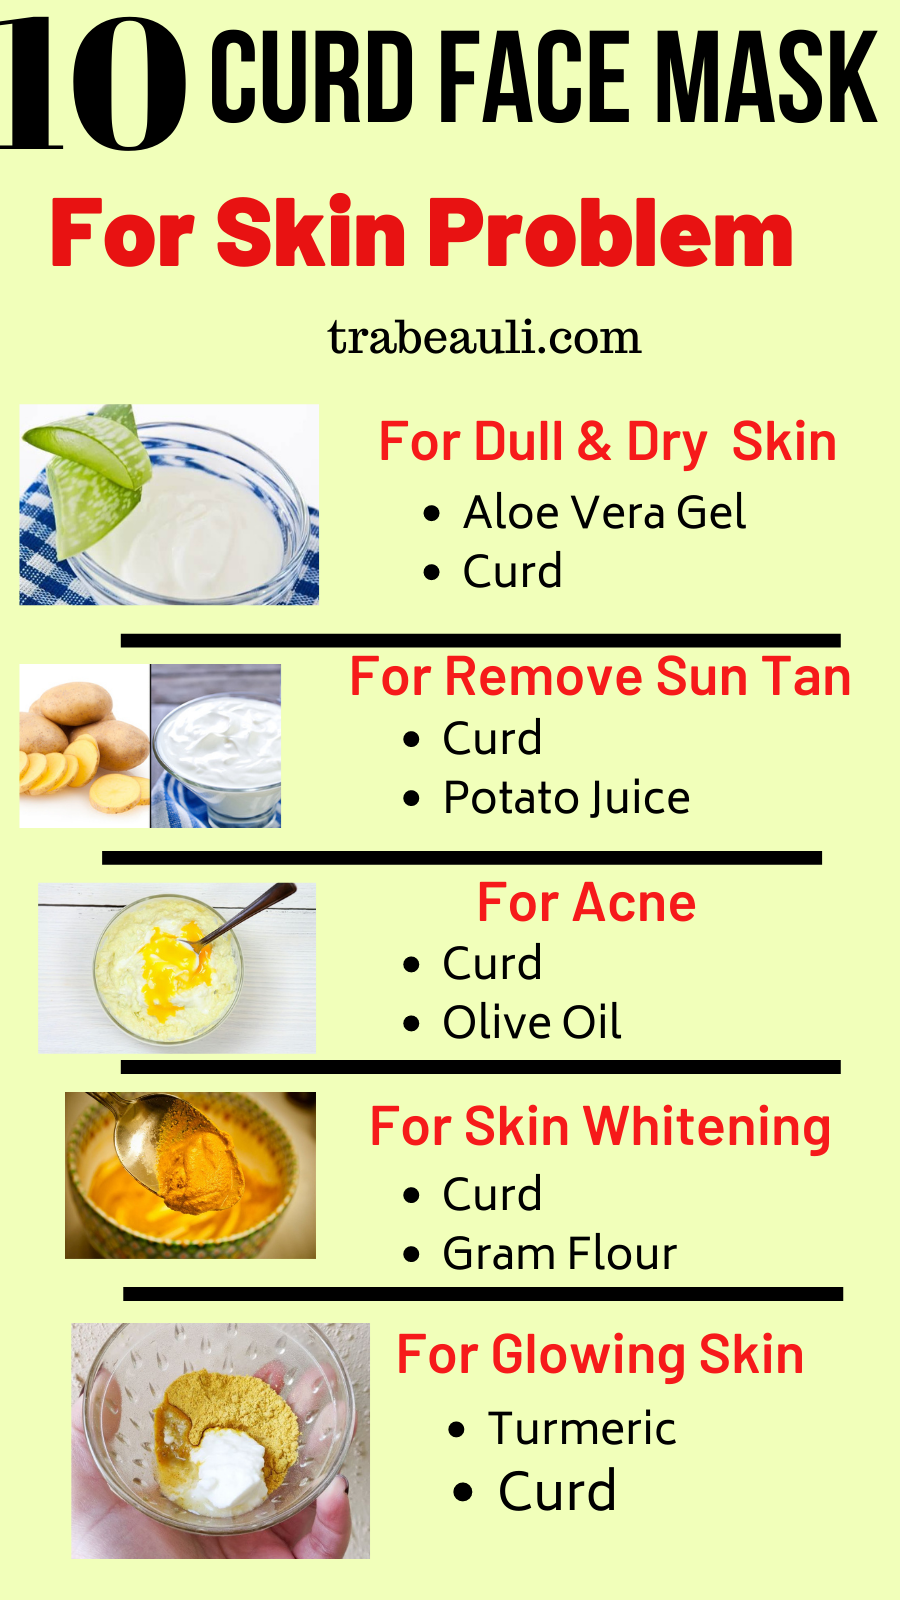 Homemade curd face mask